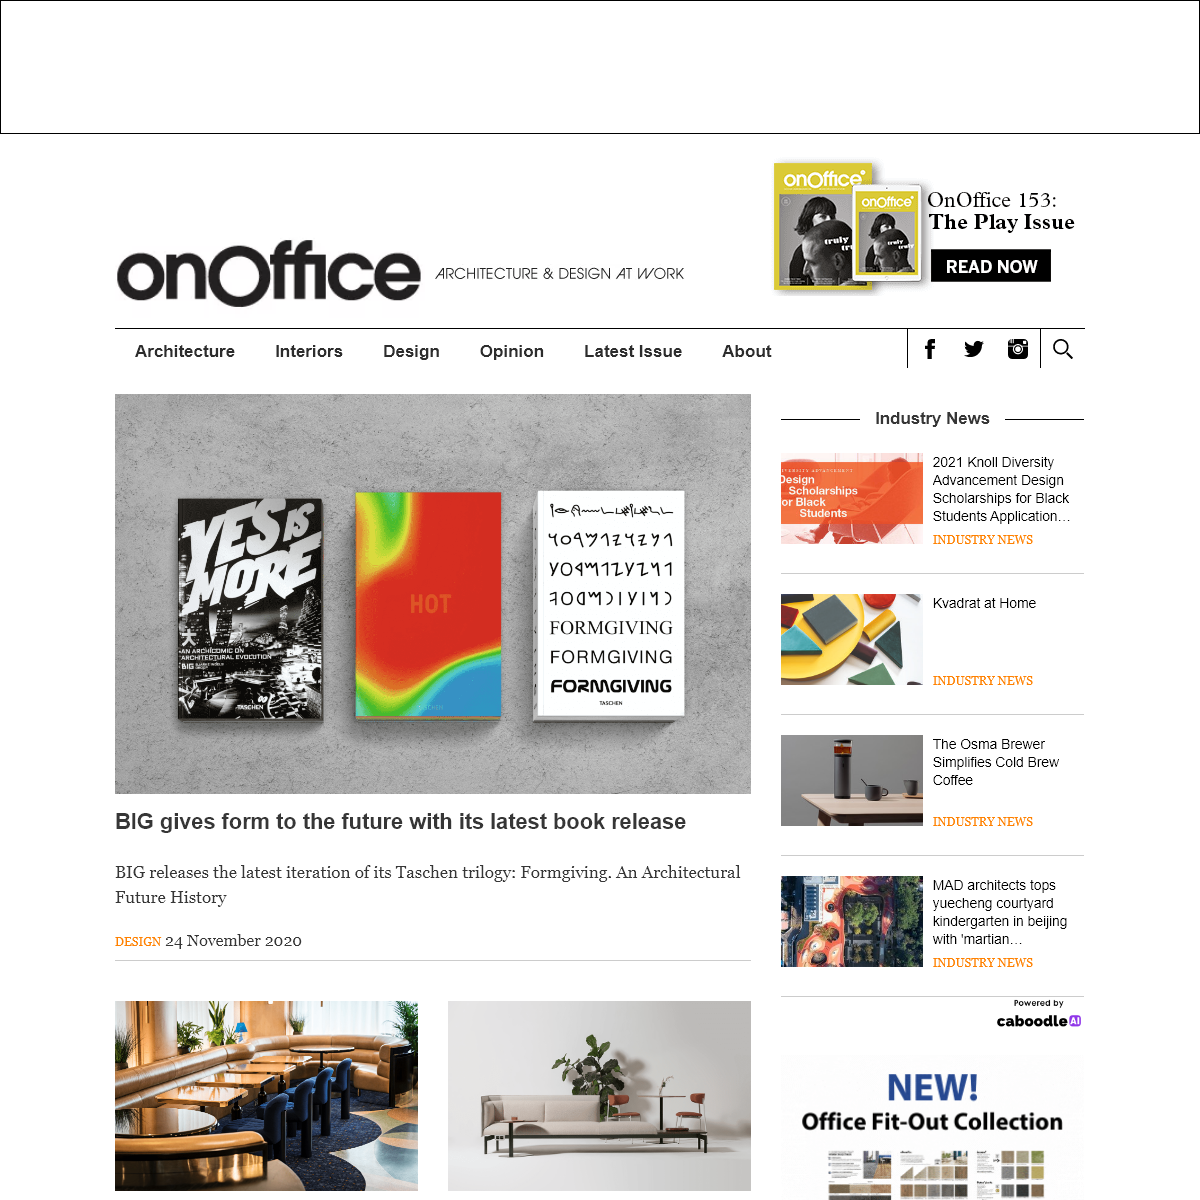 A complete backup of onofficemagazine.com